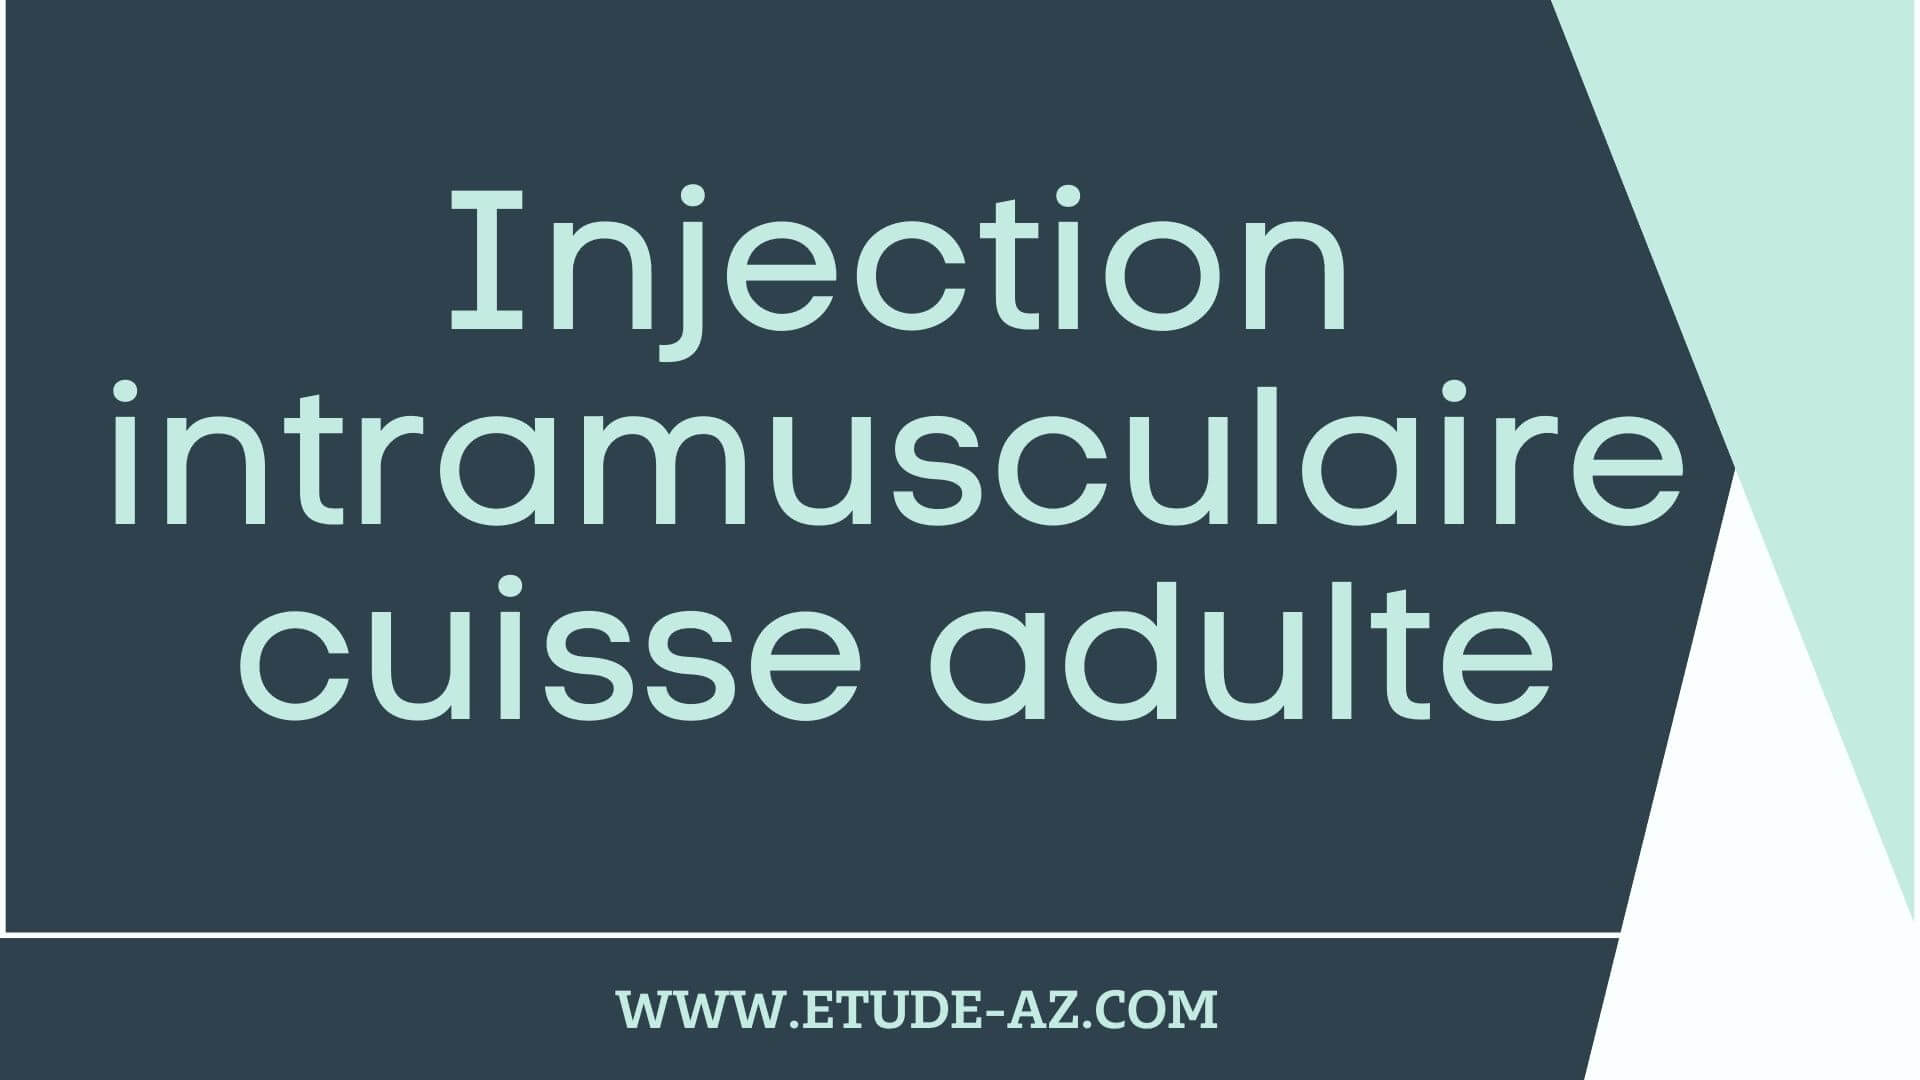 Injection intramusculaire cuisse adulte